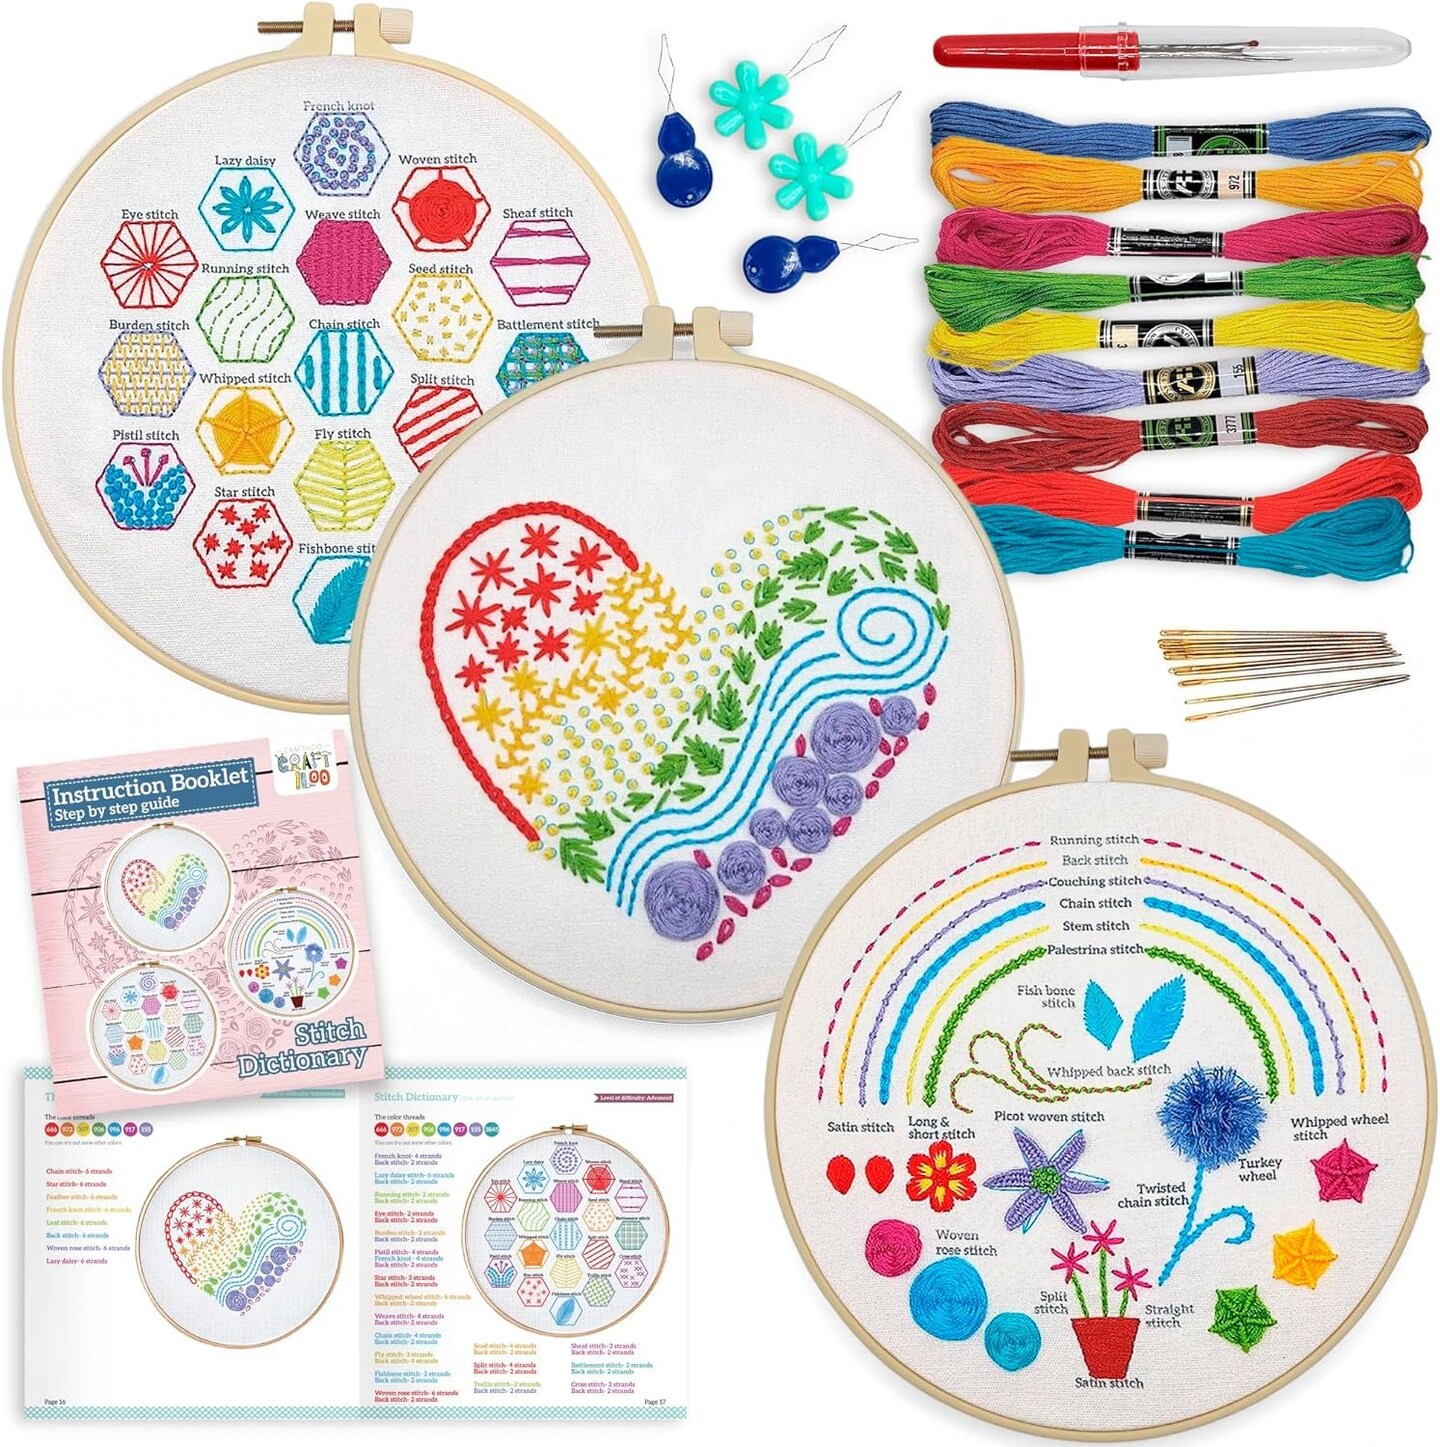 Embroidery Kit for Beginners Cross Stitch Kits for Beginners Needlepoint Kits for Adults Embroidery Kits for Adults Cross Stitch Kit Beginner Embroidery Kit for Adults Heart